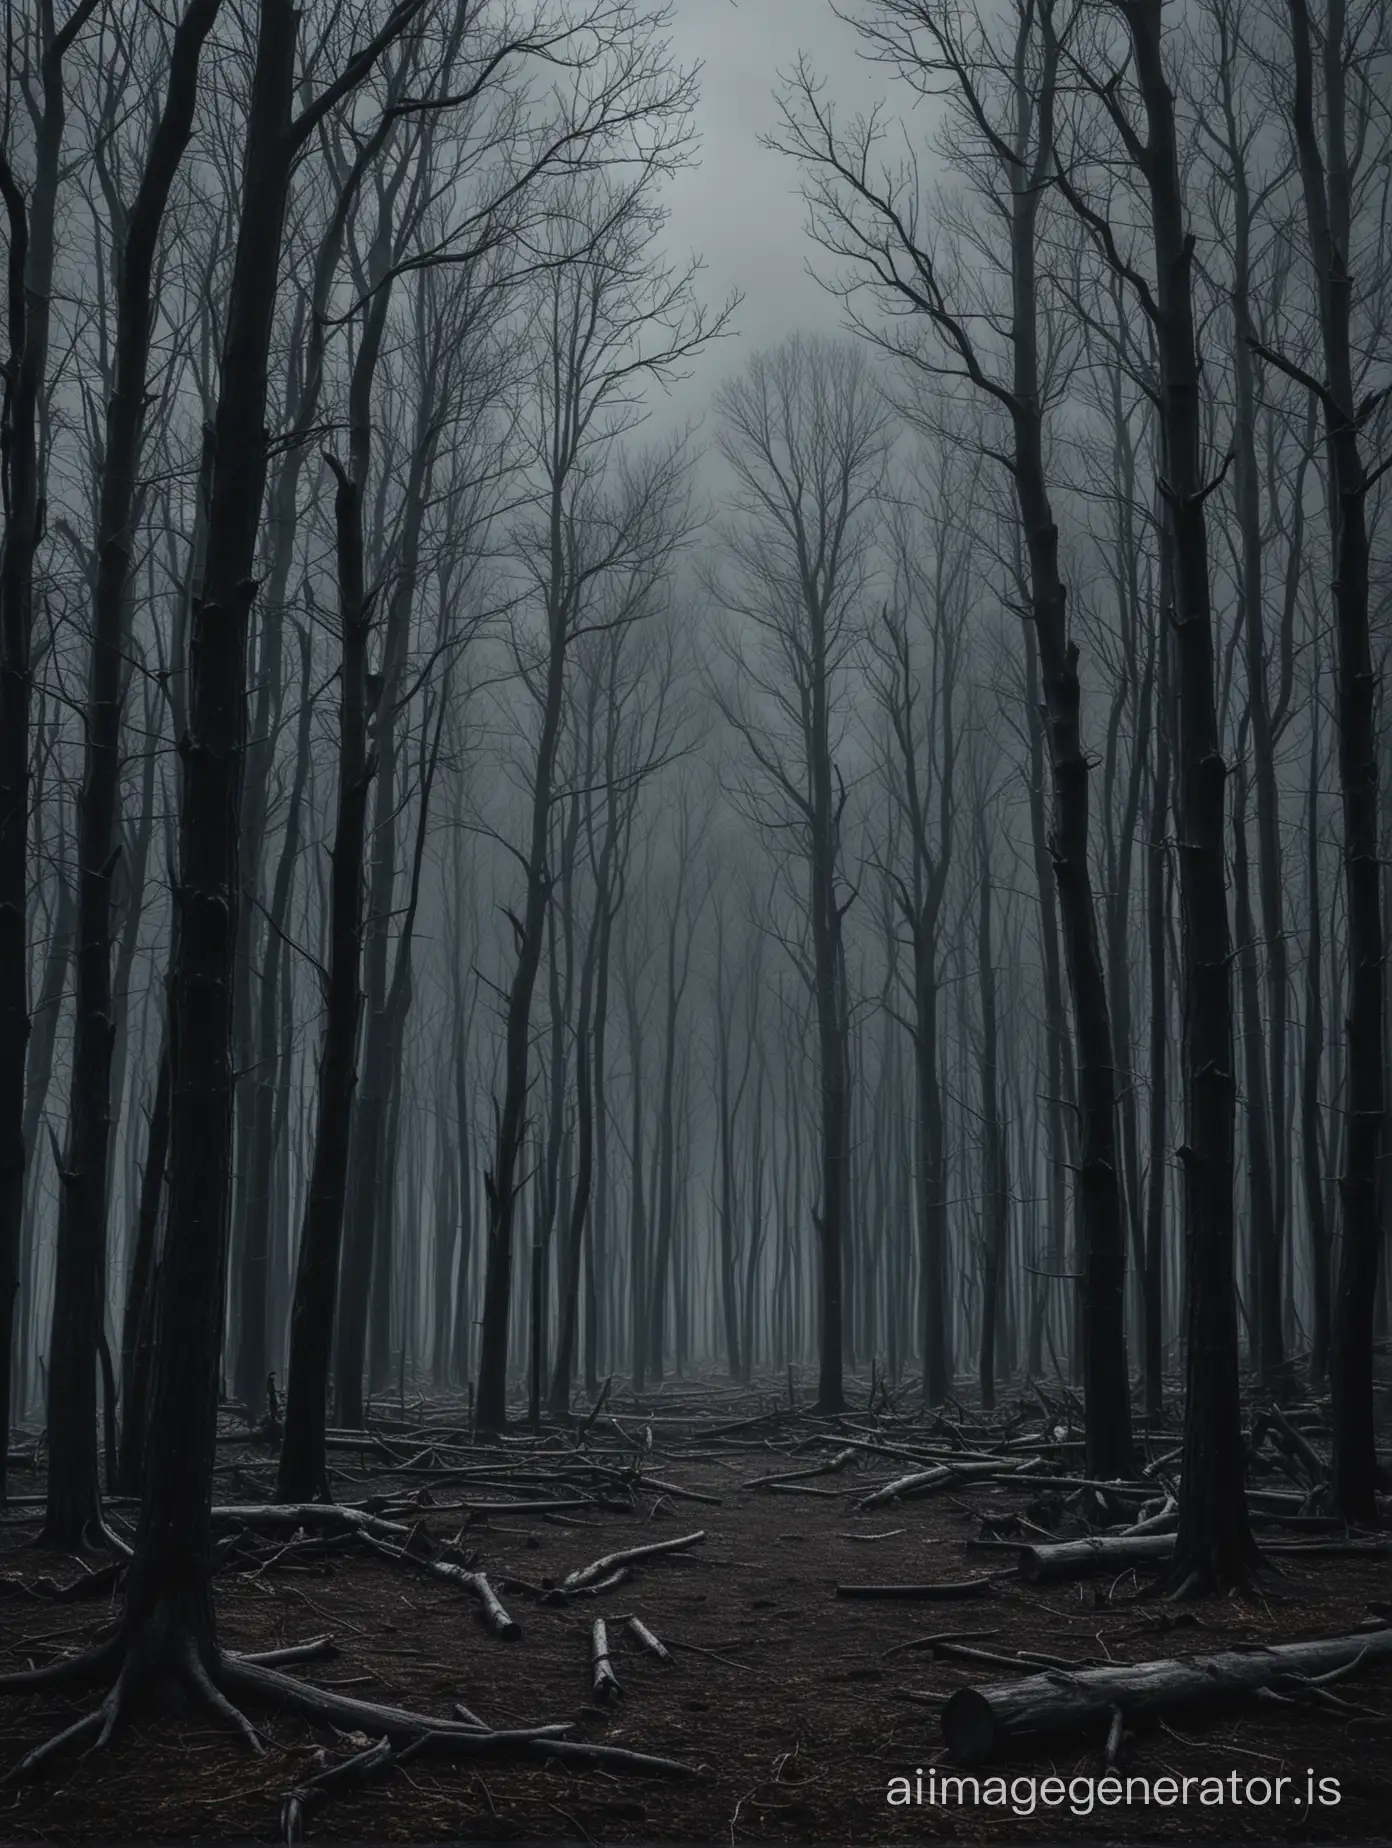 Eerie-Dark-Forest-Landscape-with-Dead-Trees